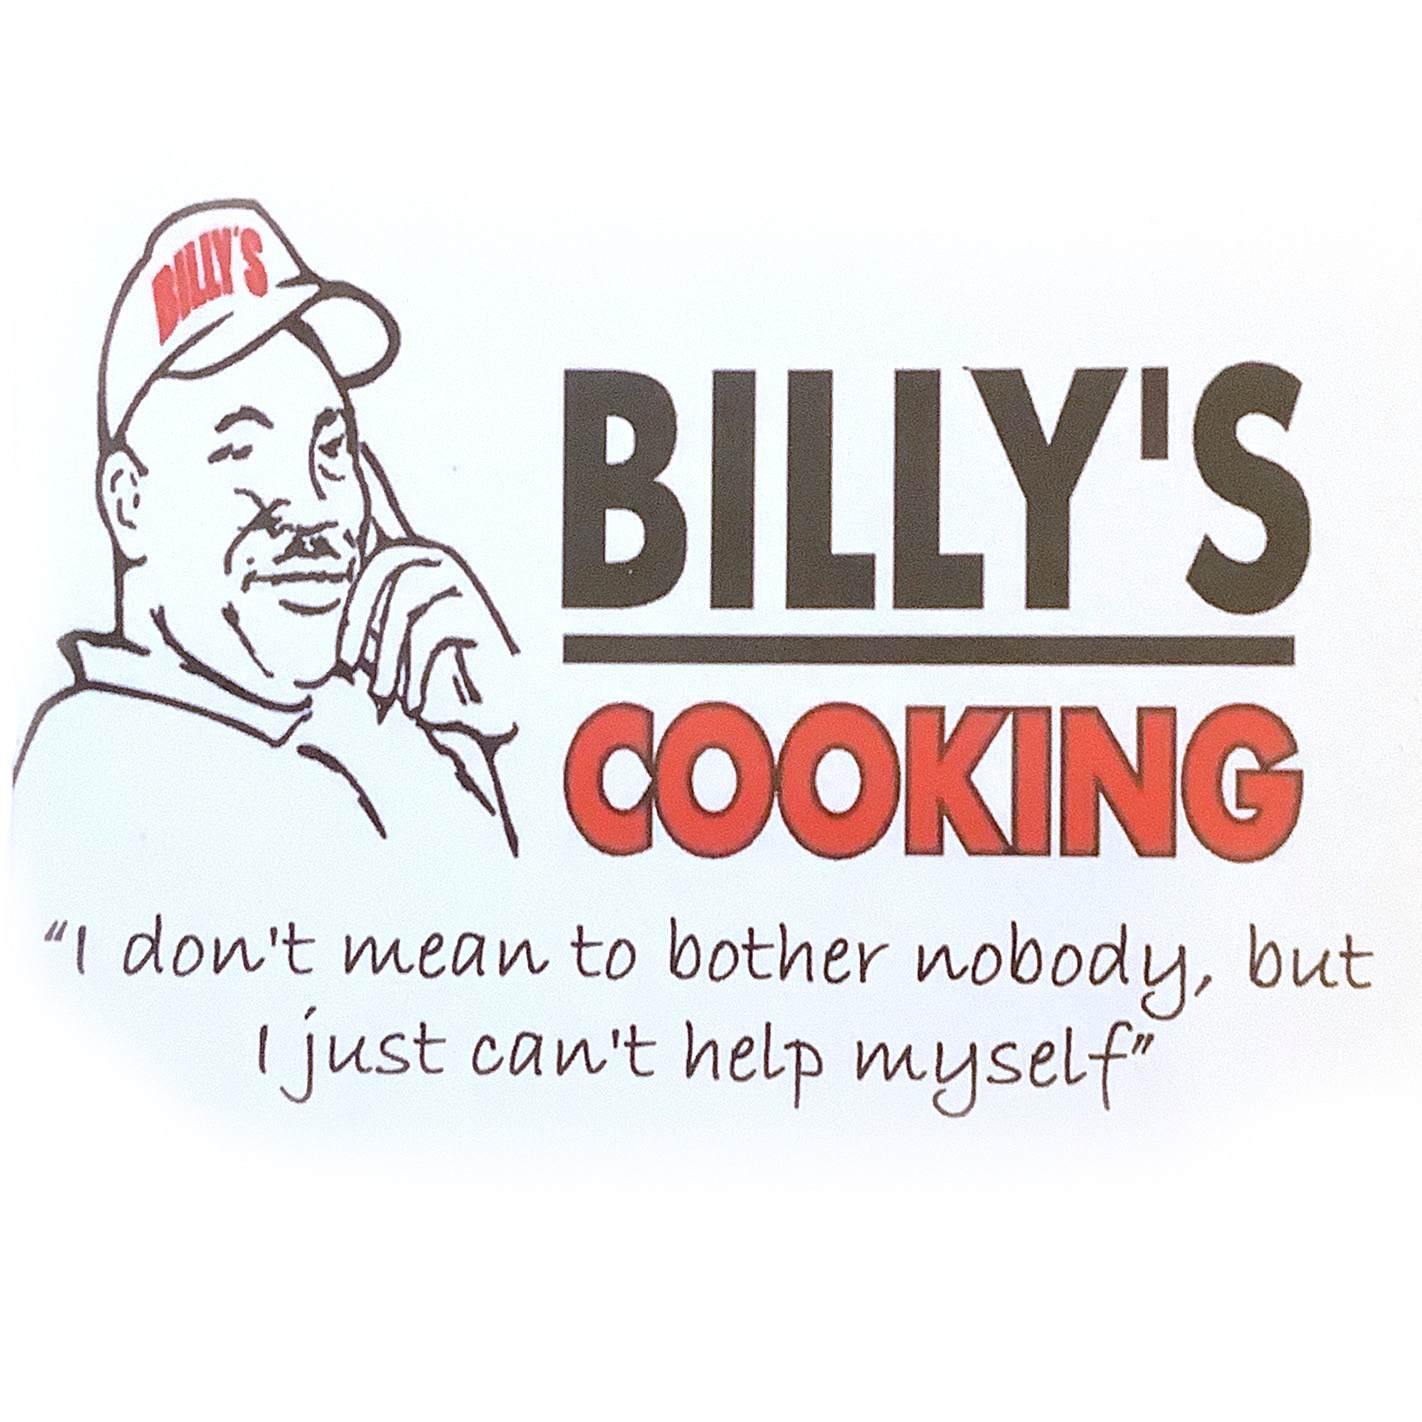 Billy's Cooking